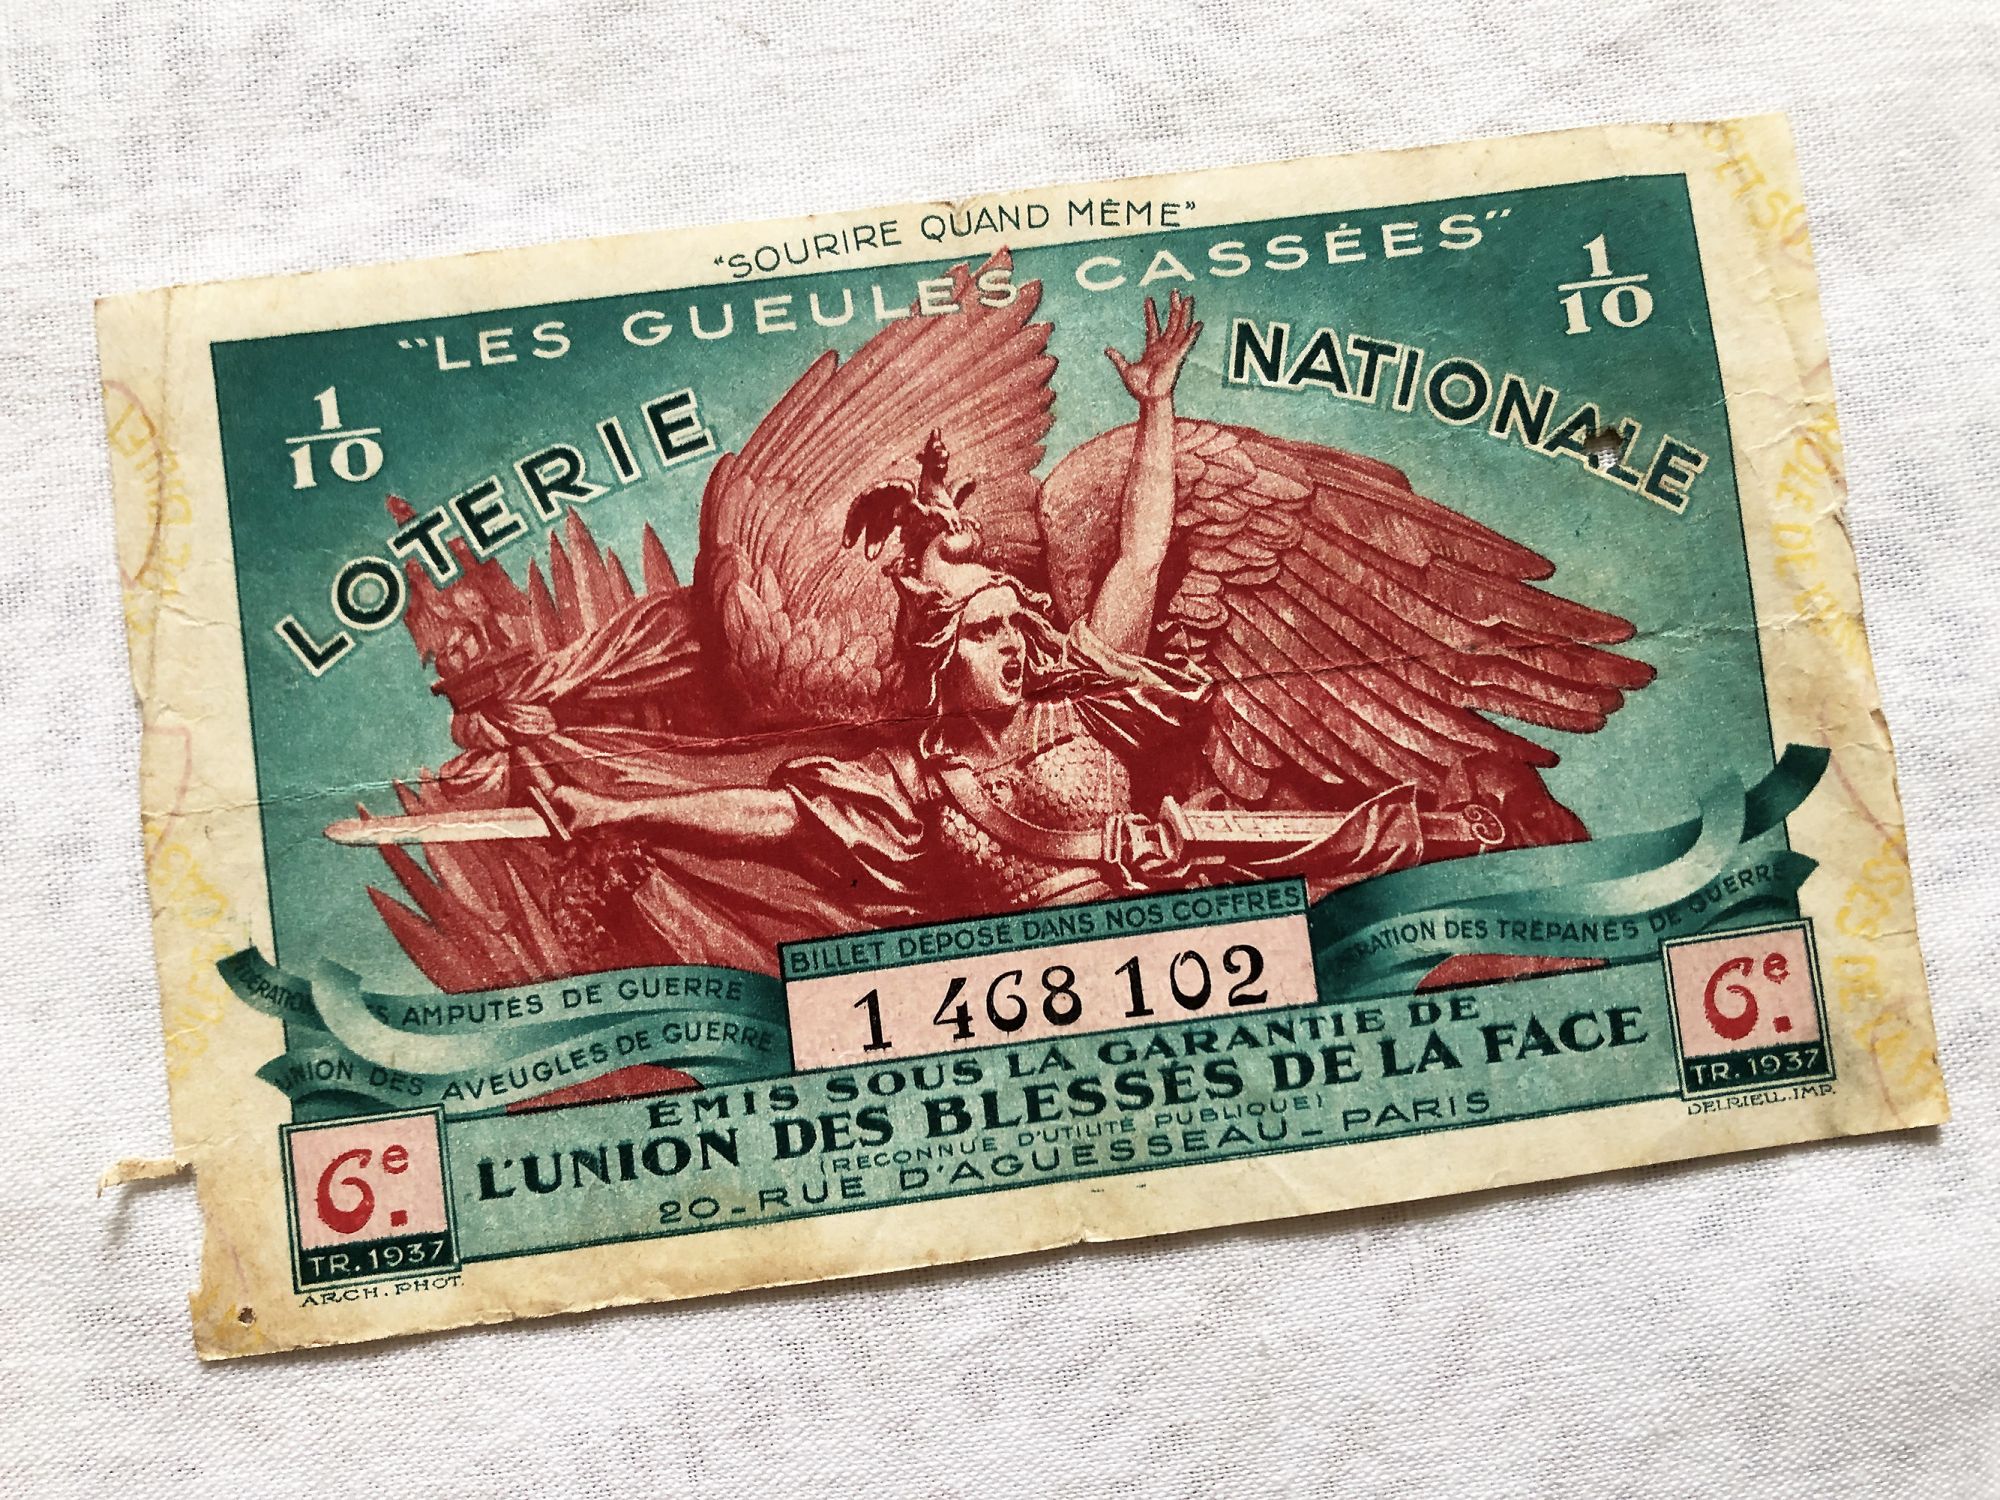 Huge French lottery tickets "Les gueules cassées" from 1937